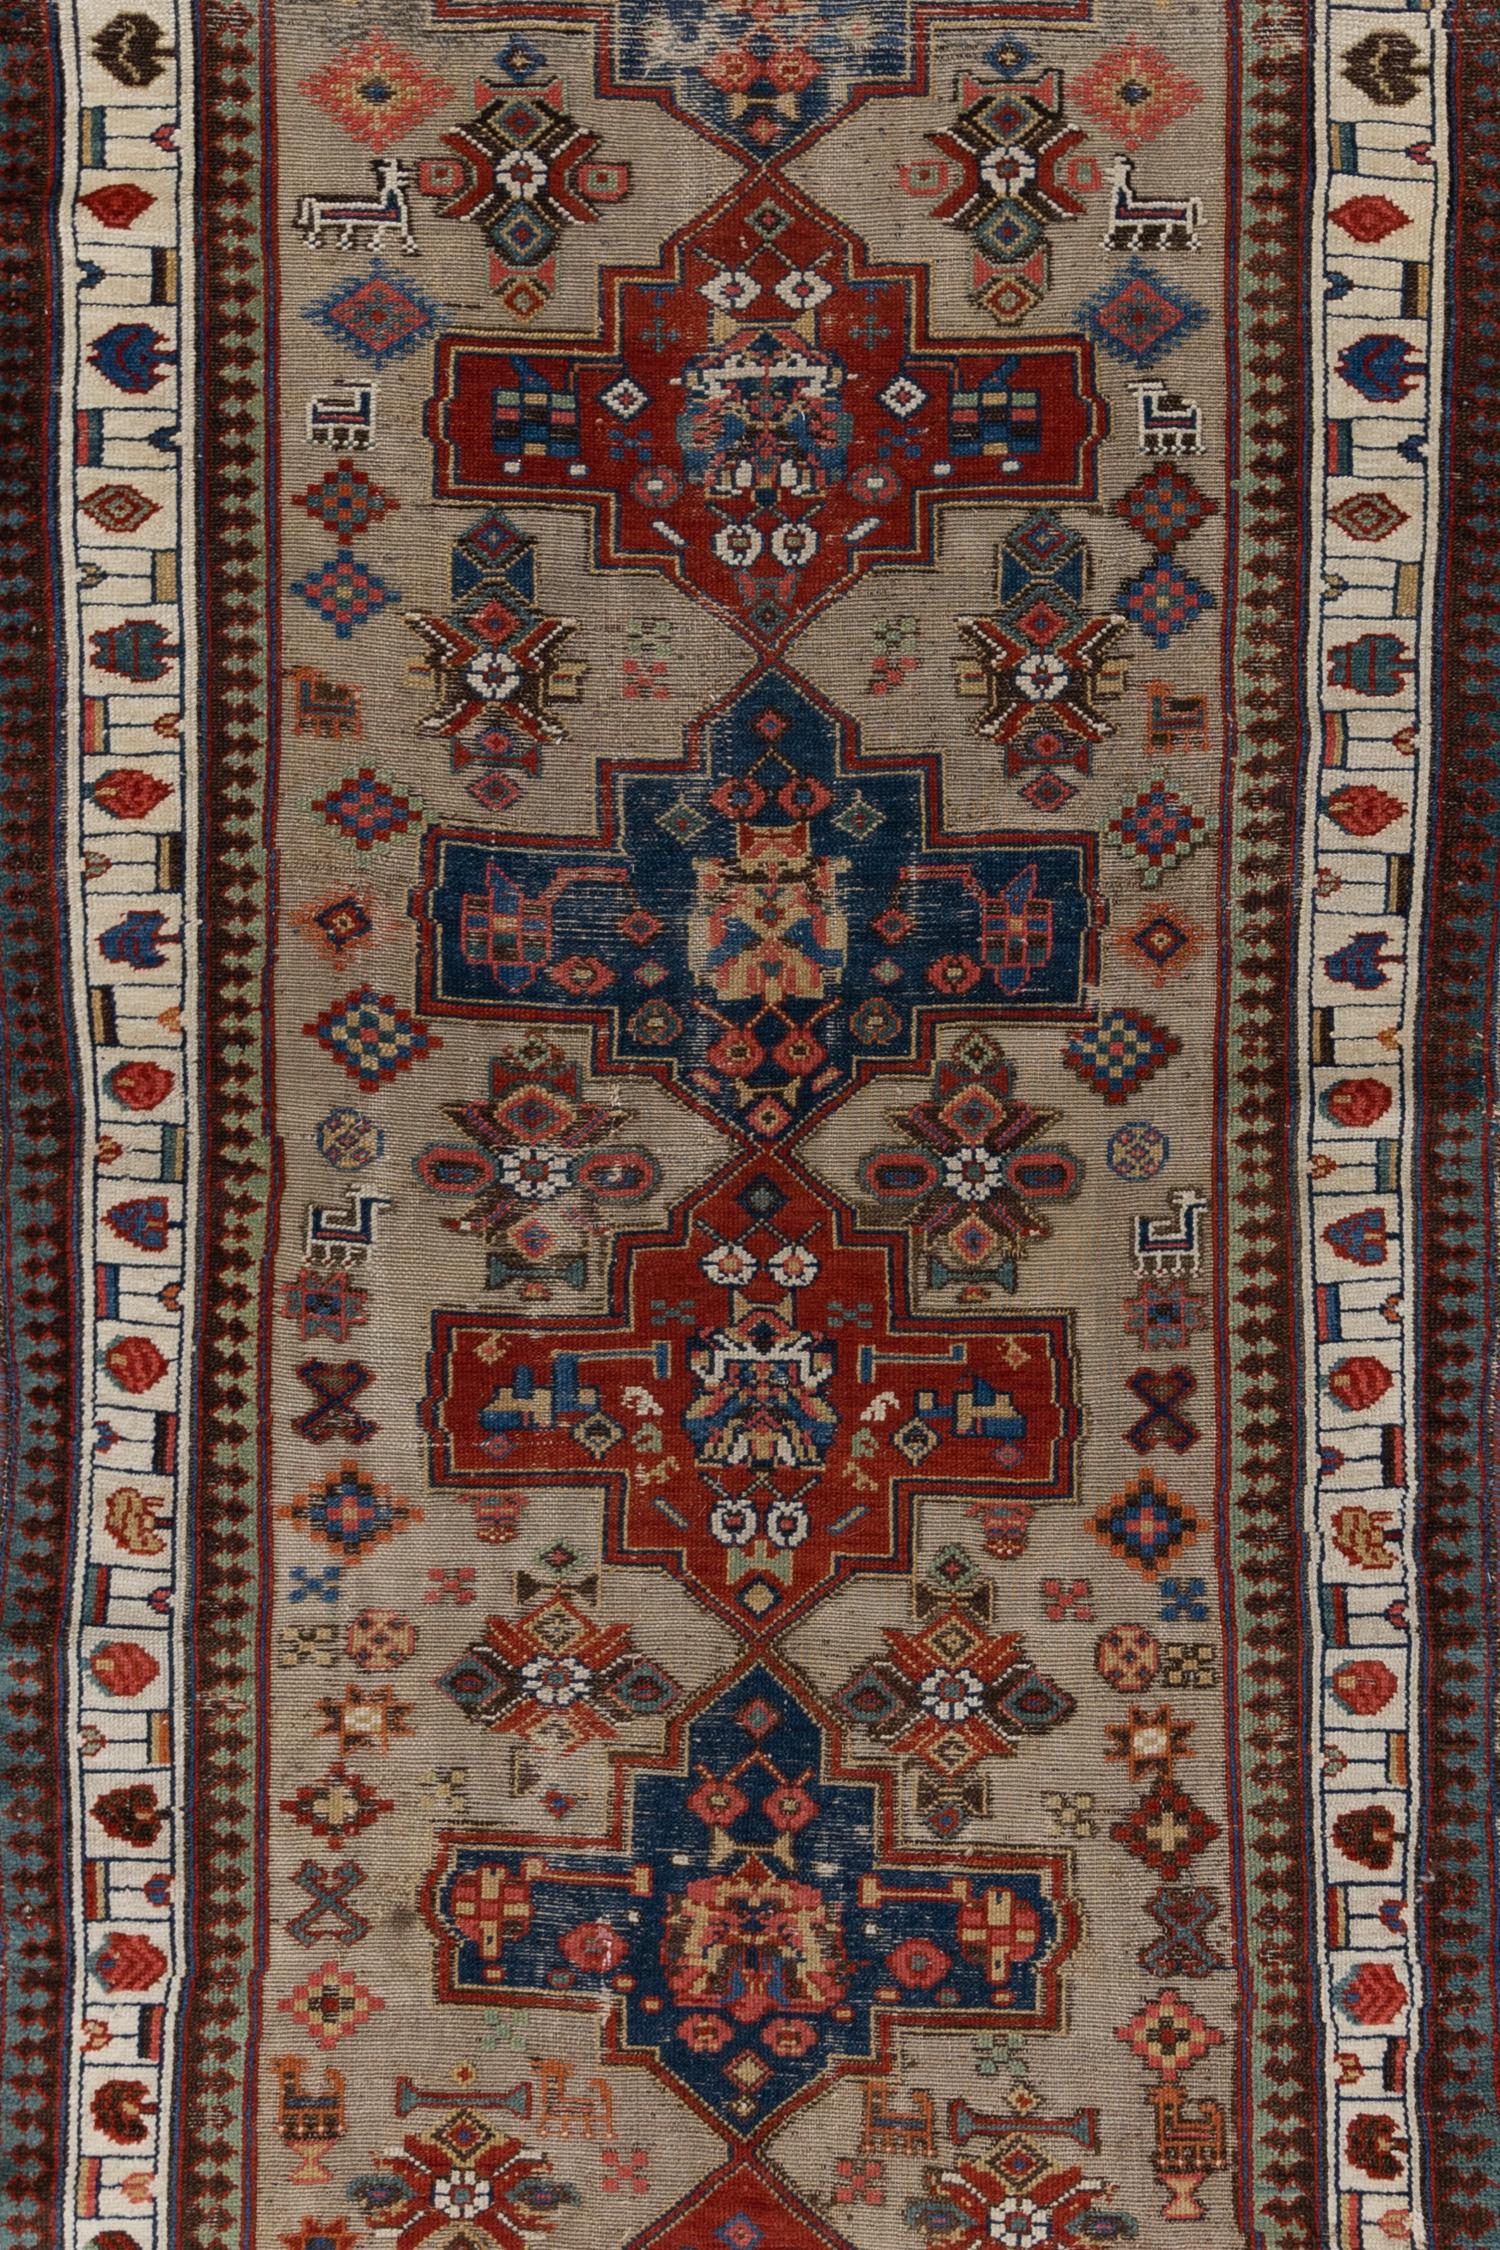 Wool on wool foundation with a beautiful camel toned field. Soft underfoot and classic in coloration.
 
Wear Notes: 8

Wear Guide:
Vintage and antique rugs are by nature, pre-loved and may show evidence of their past. There are varying degrees